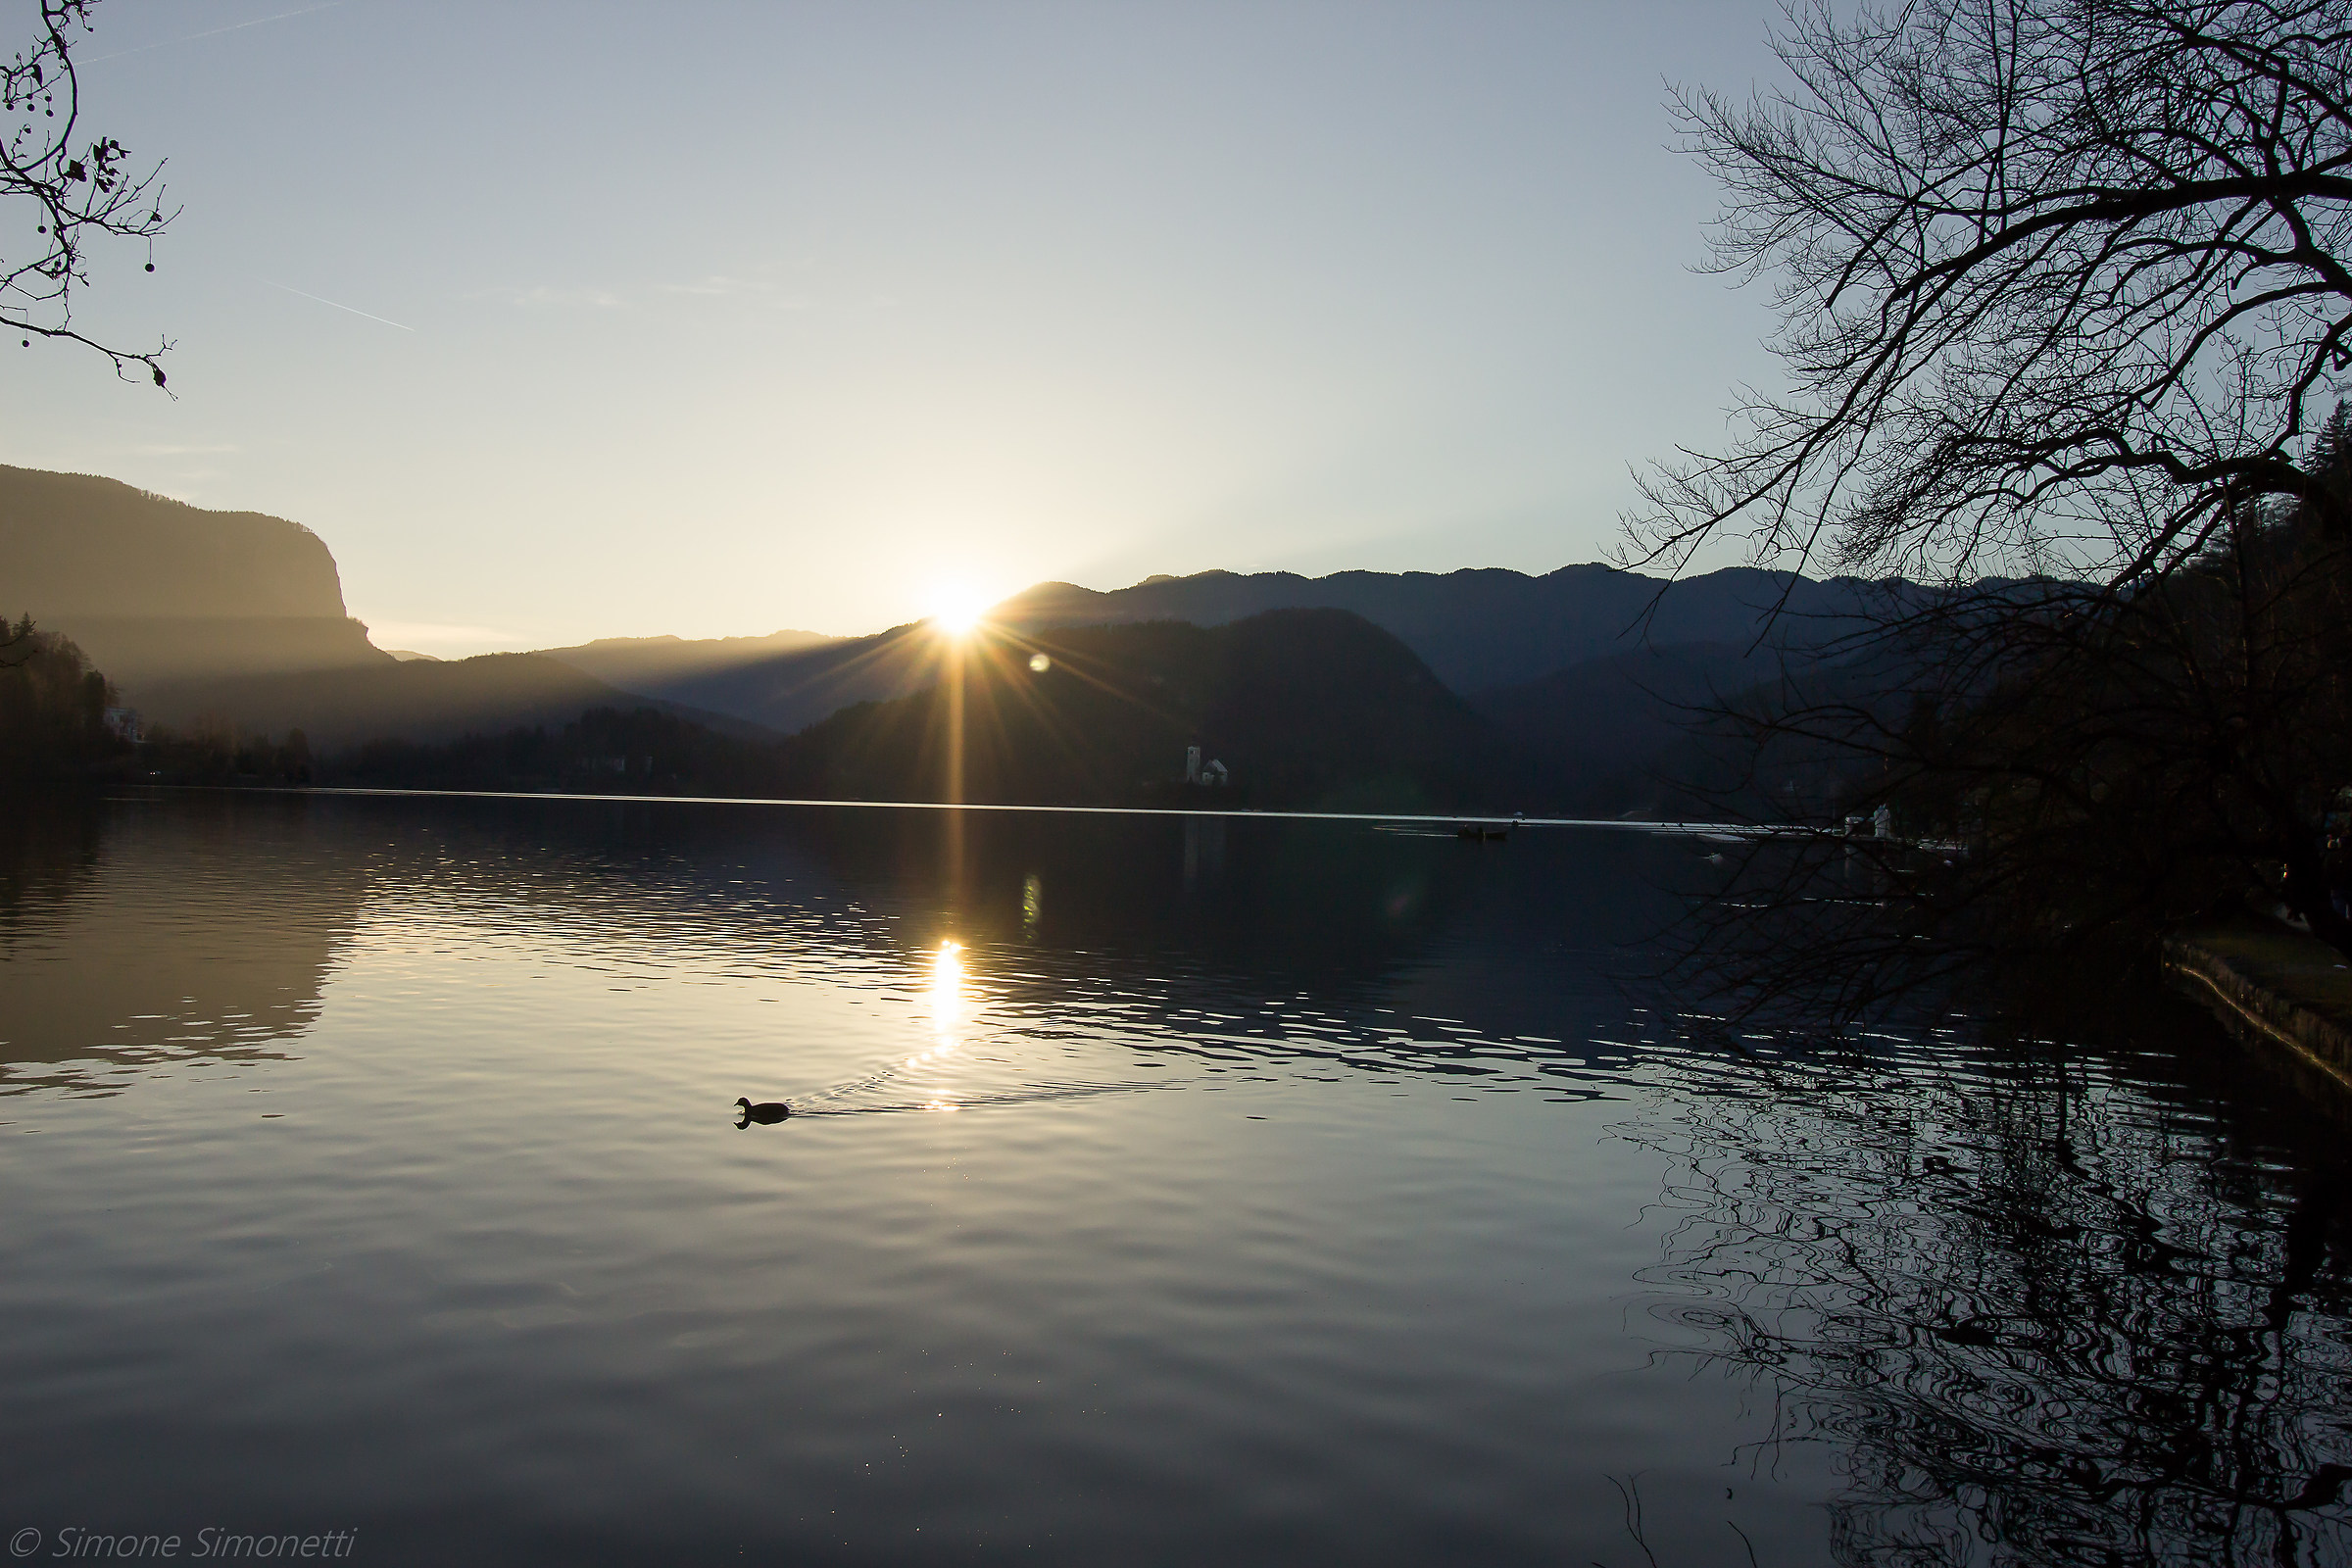 Sunset in Bled...